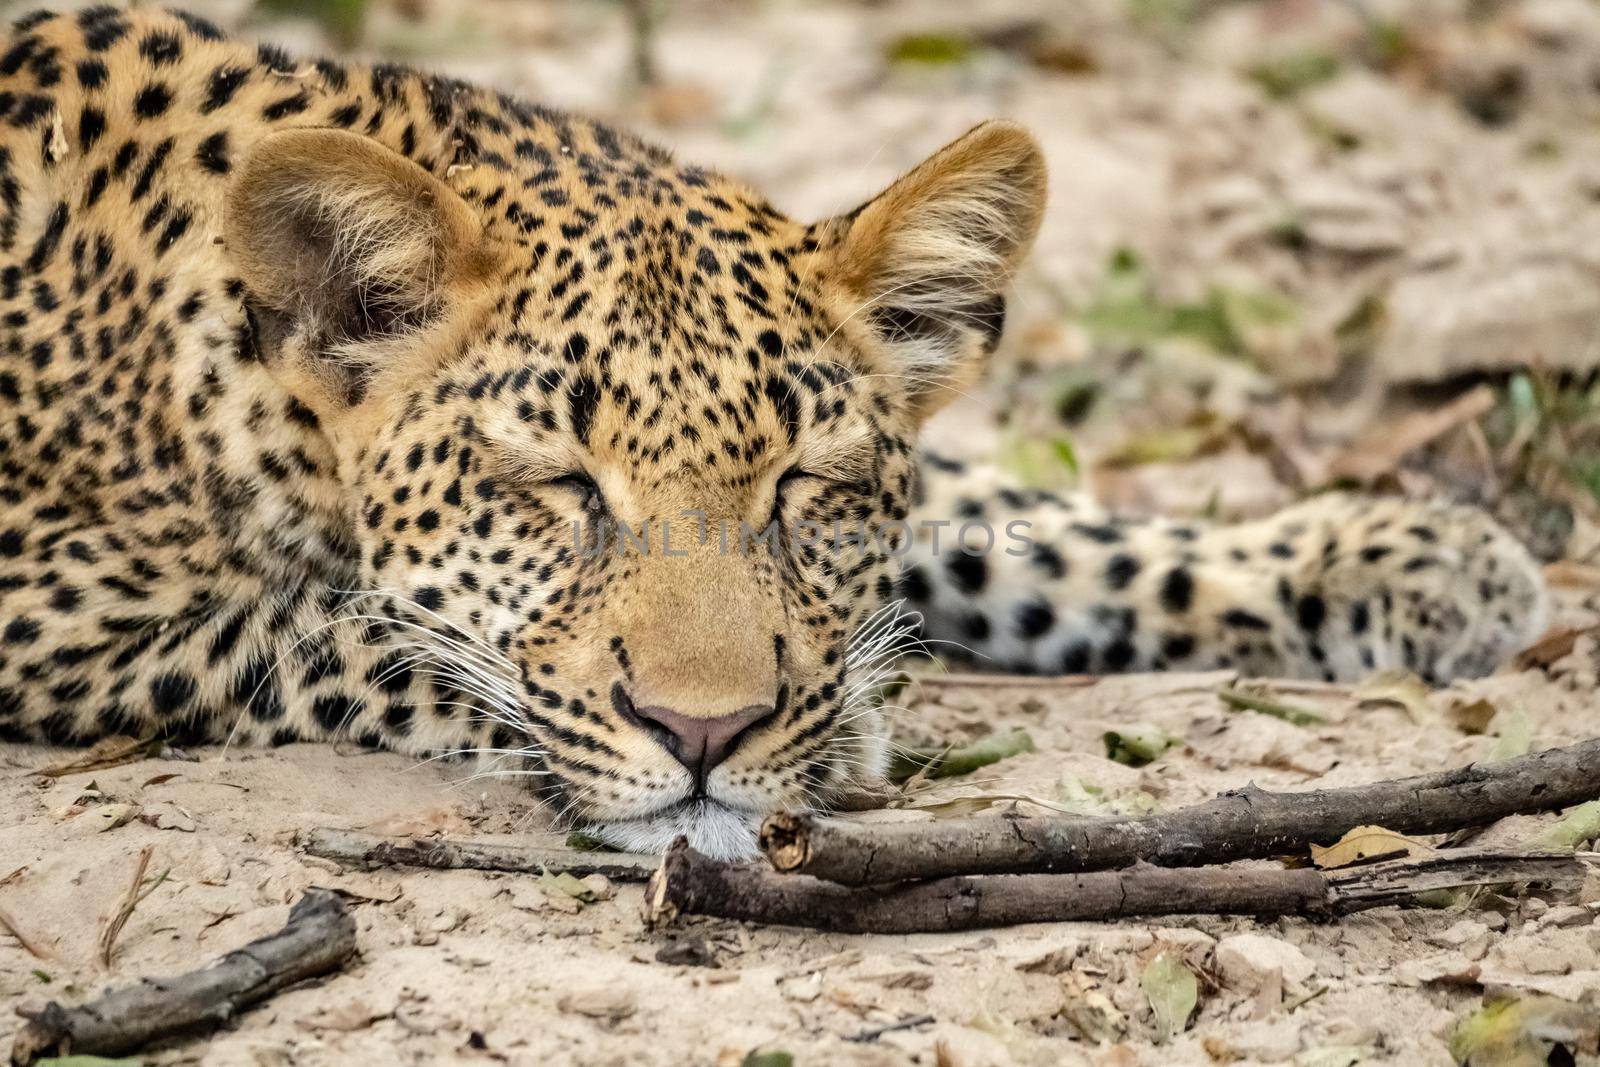 A close-up of a leopard cub resting in the bush after eating